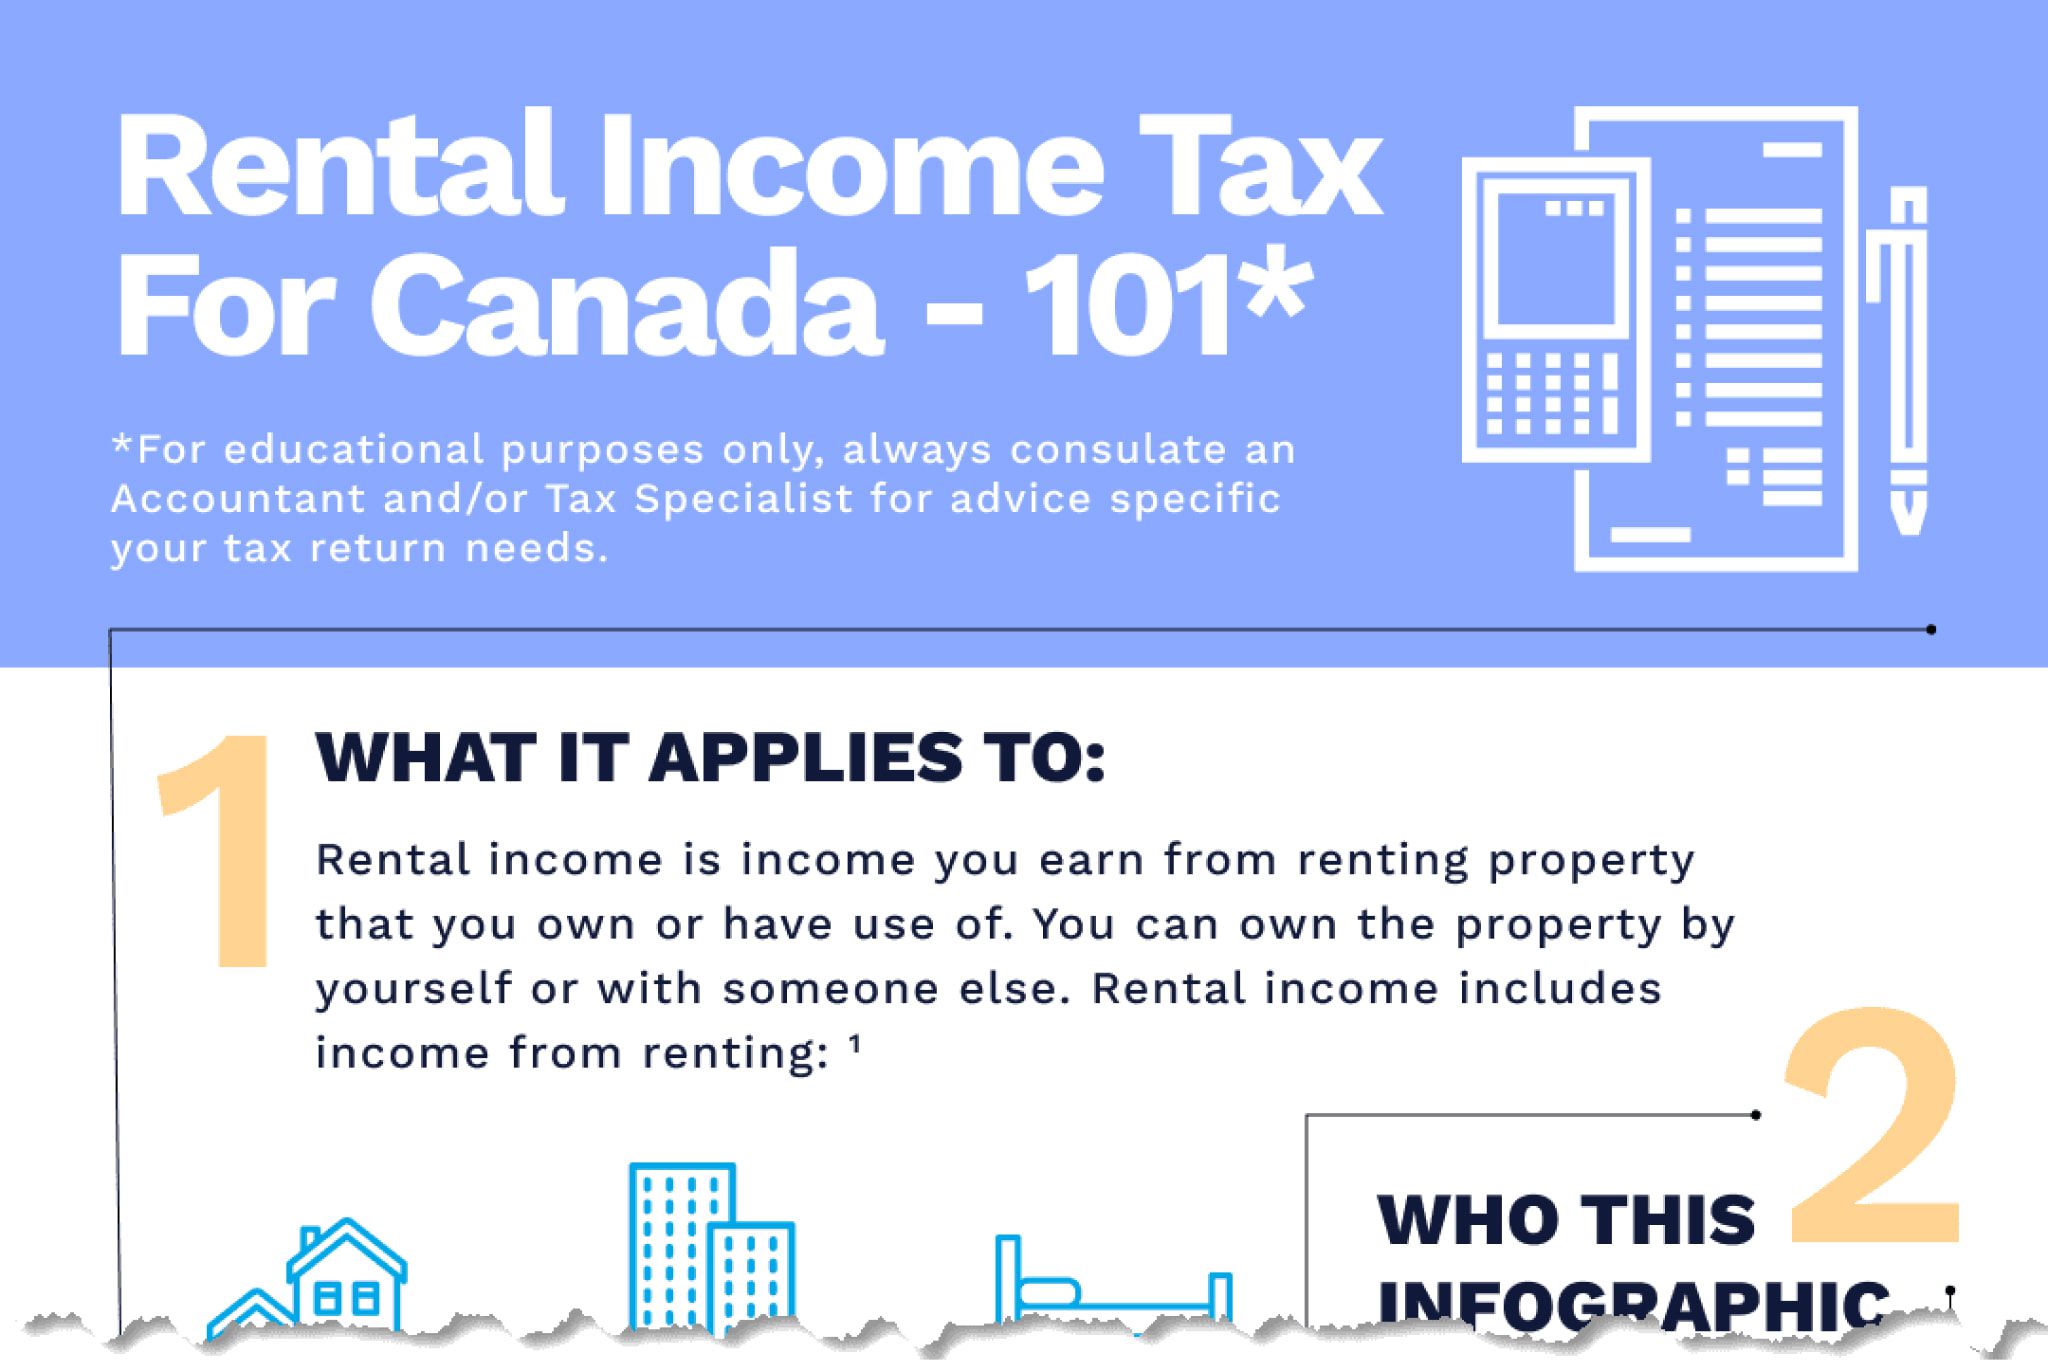 Rental income tax guide for Canadian landlords. This infographic displays rental income and what write offs you can claim for a rental.